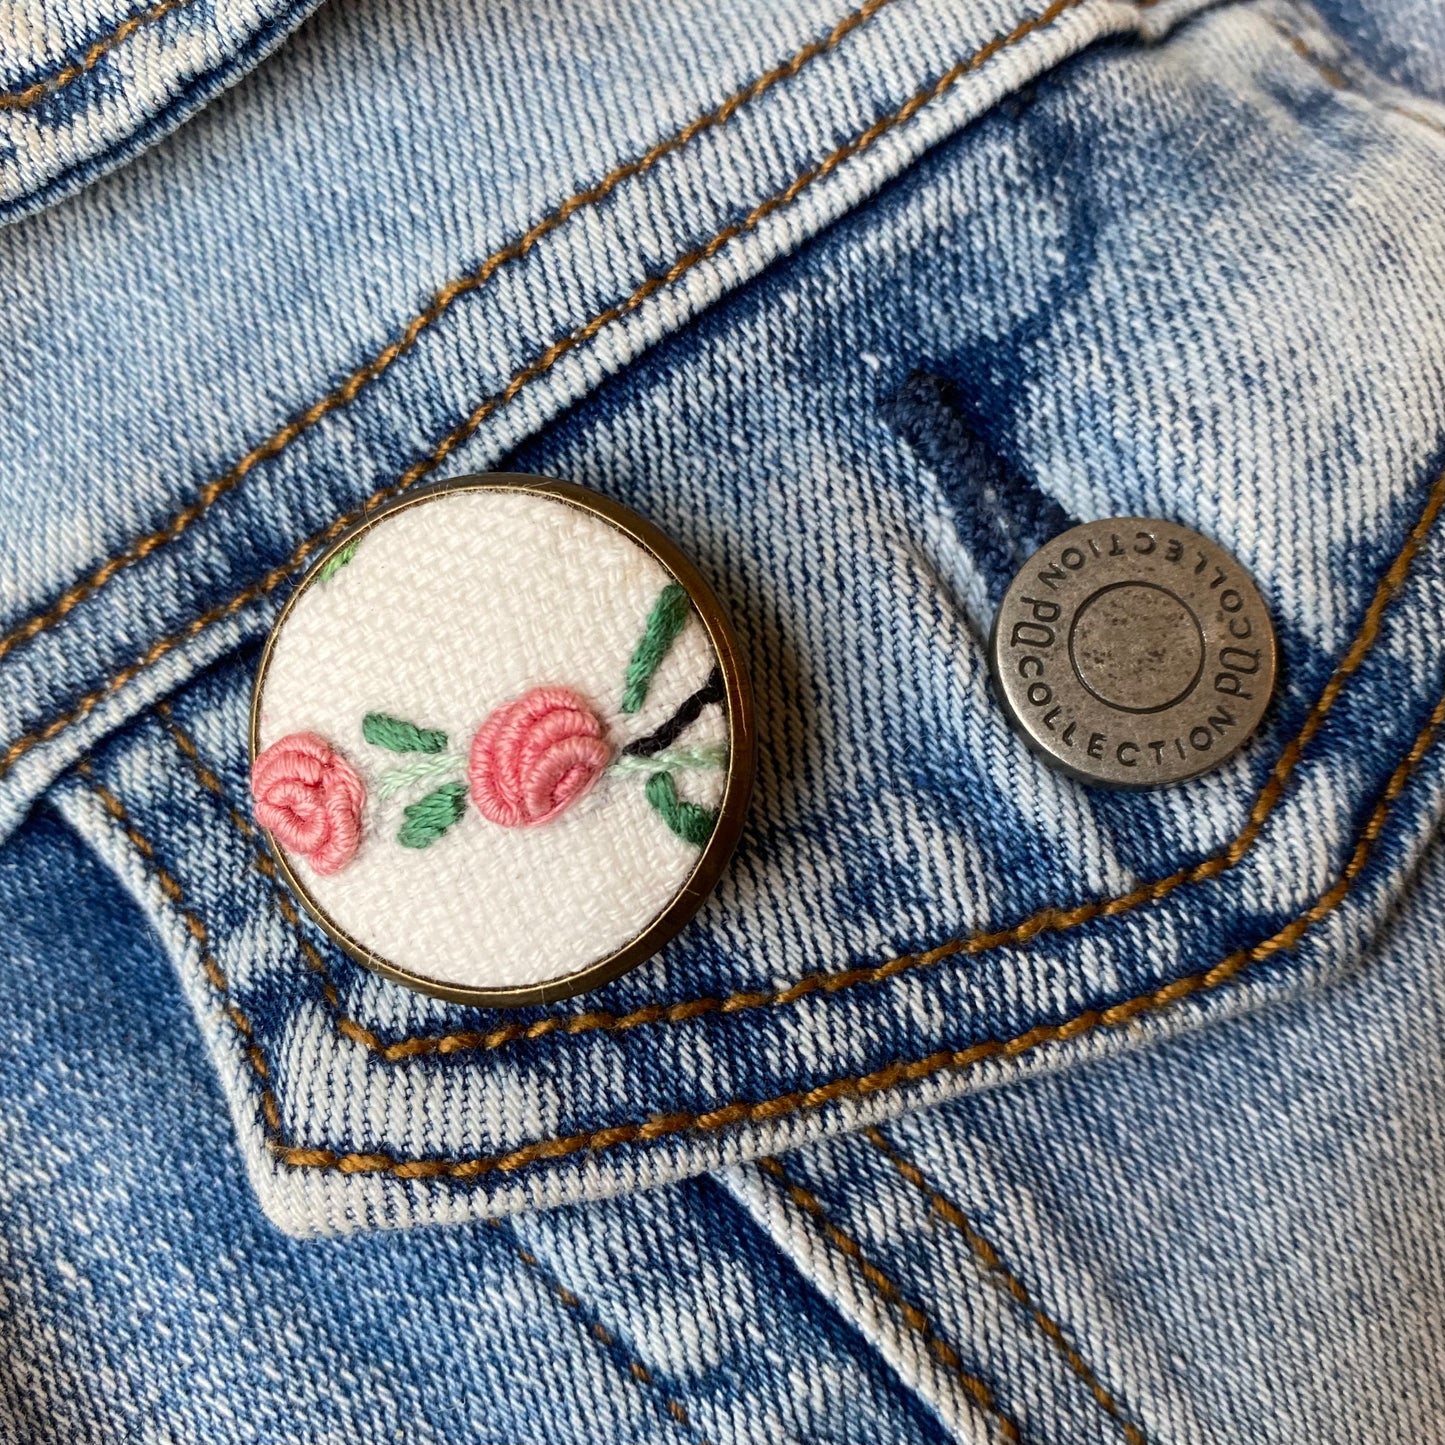 Embroidered pins